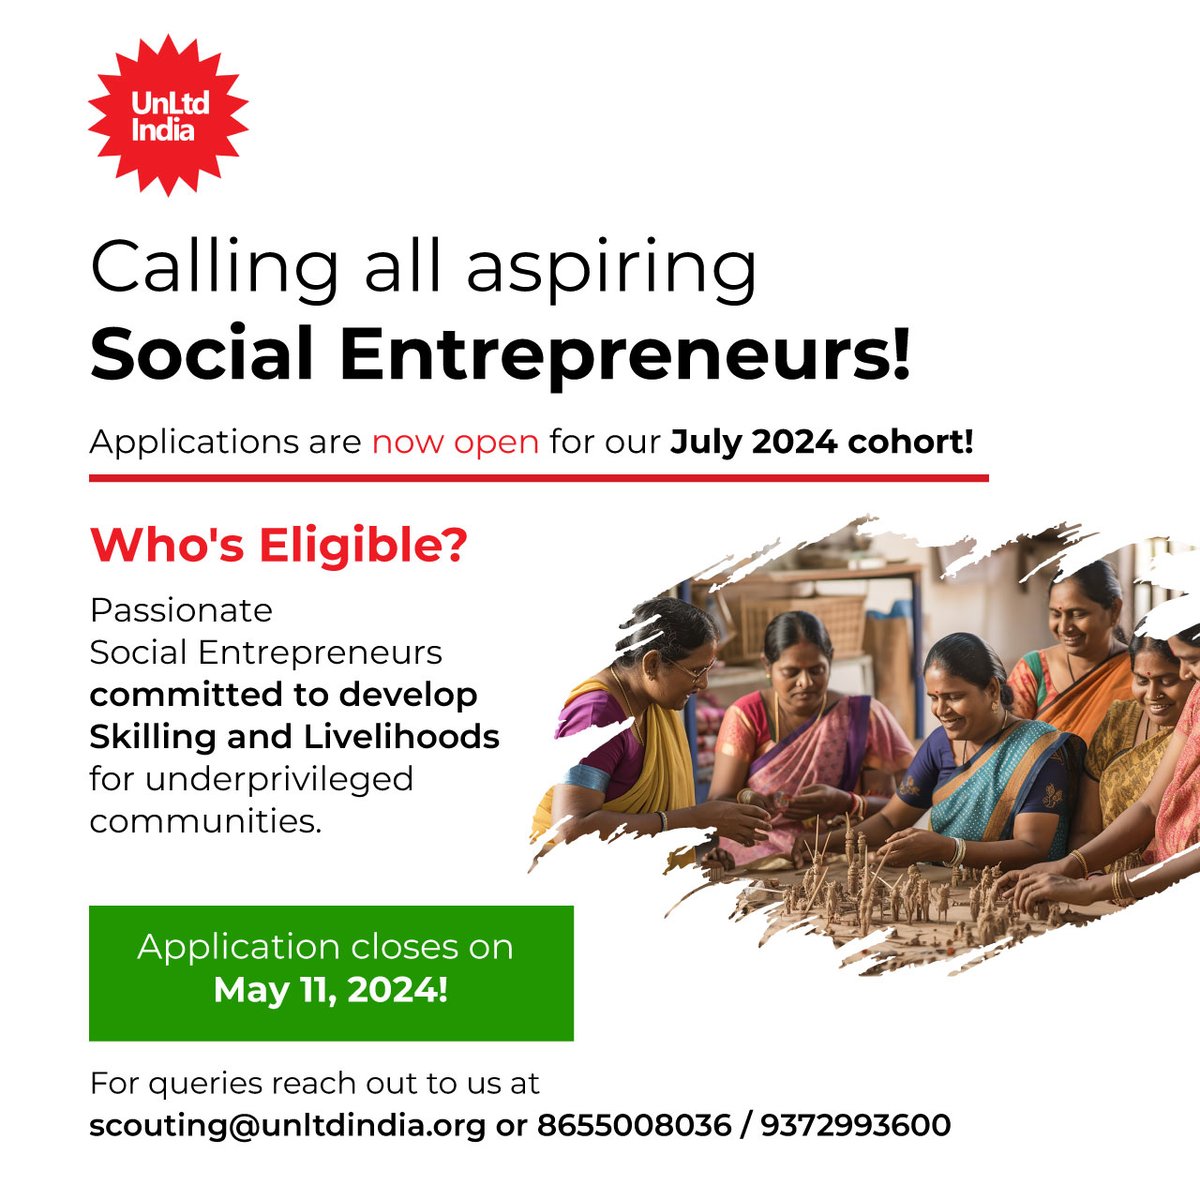 Are you ready to scale up your social enterprise? Applications for our July 2024 cohort are currently open. Visit our website to find out more about our Incubation program and to apply: lnkd.in/gGwaHUsD #UnLtdIndia #skilling #livelihood